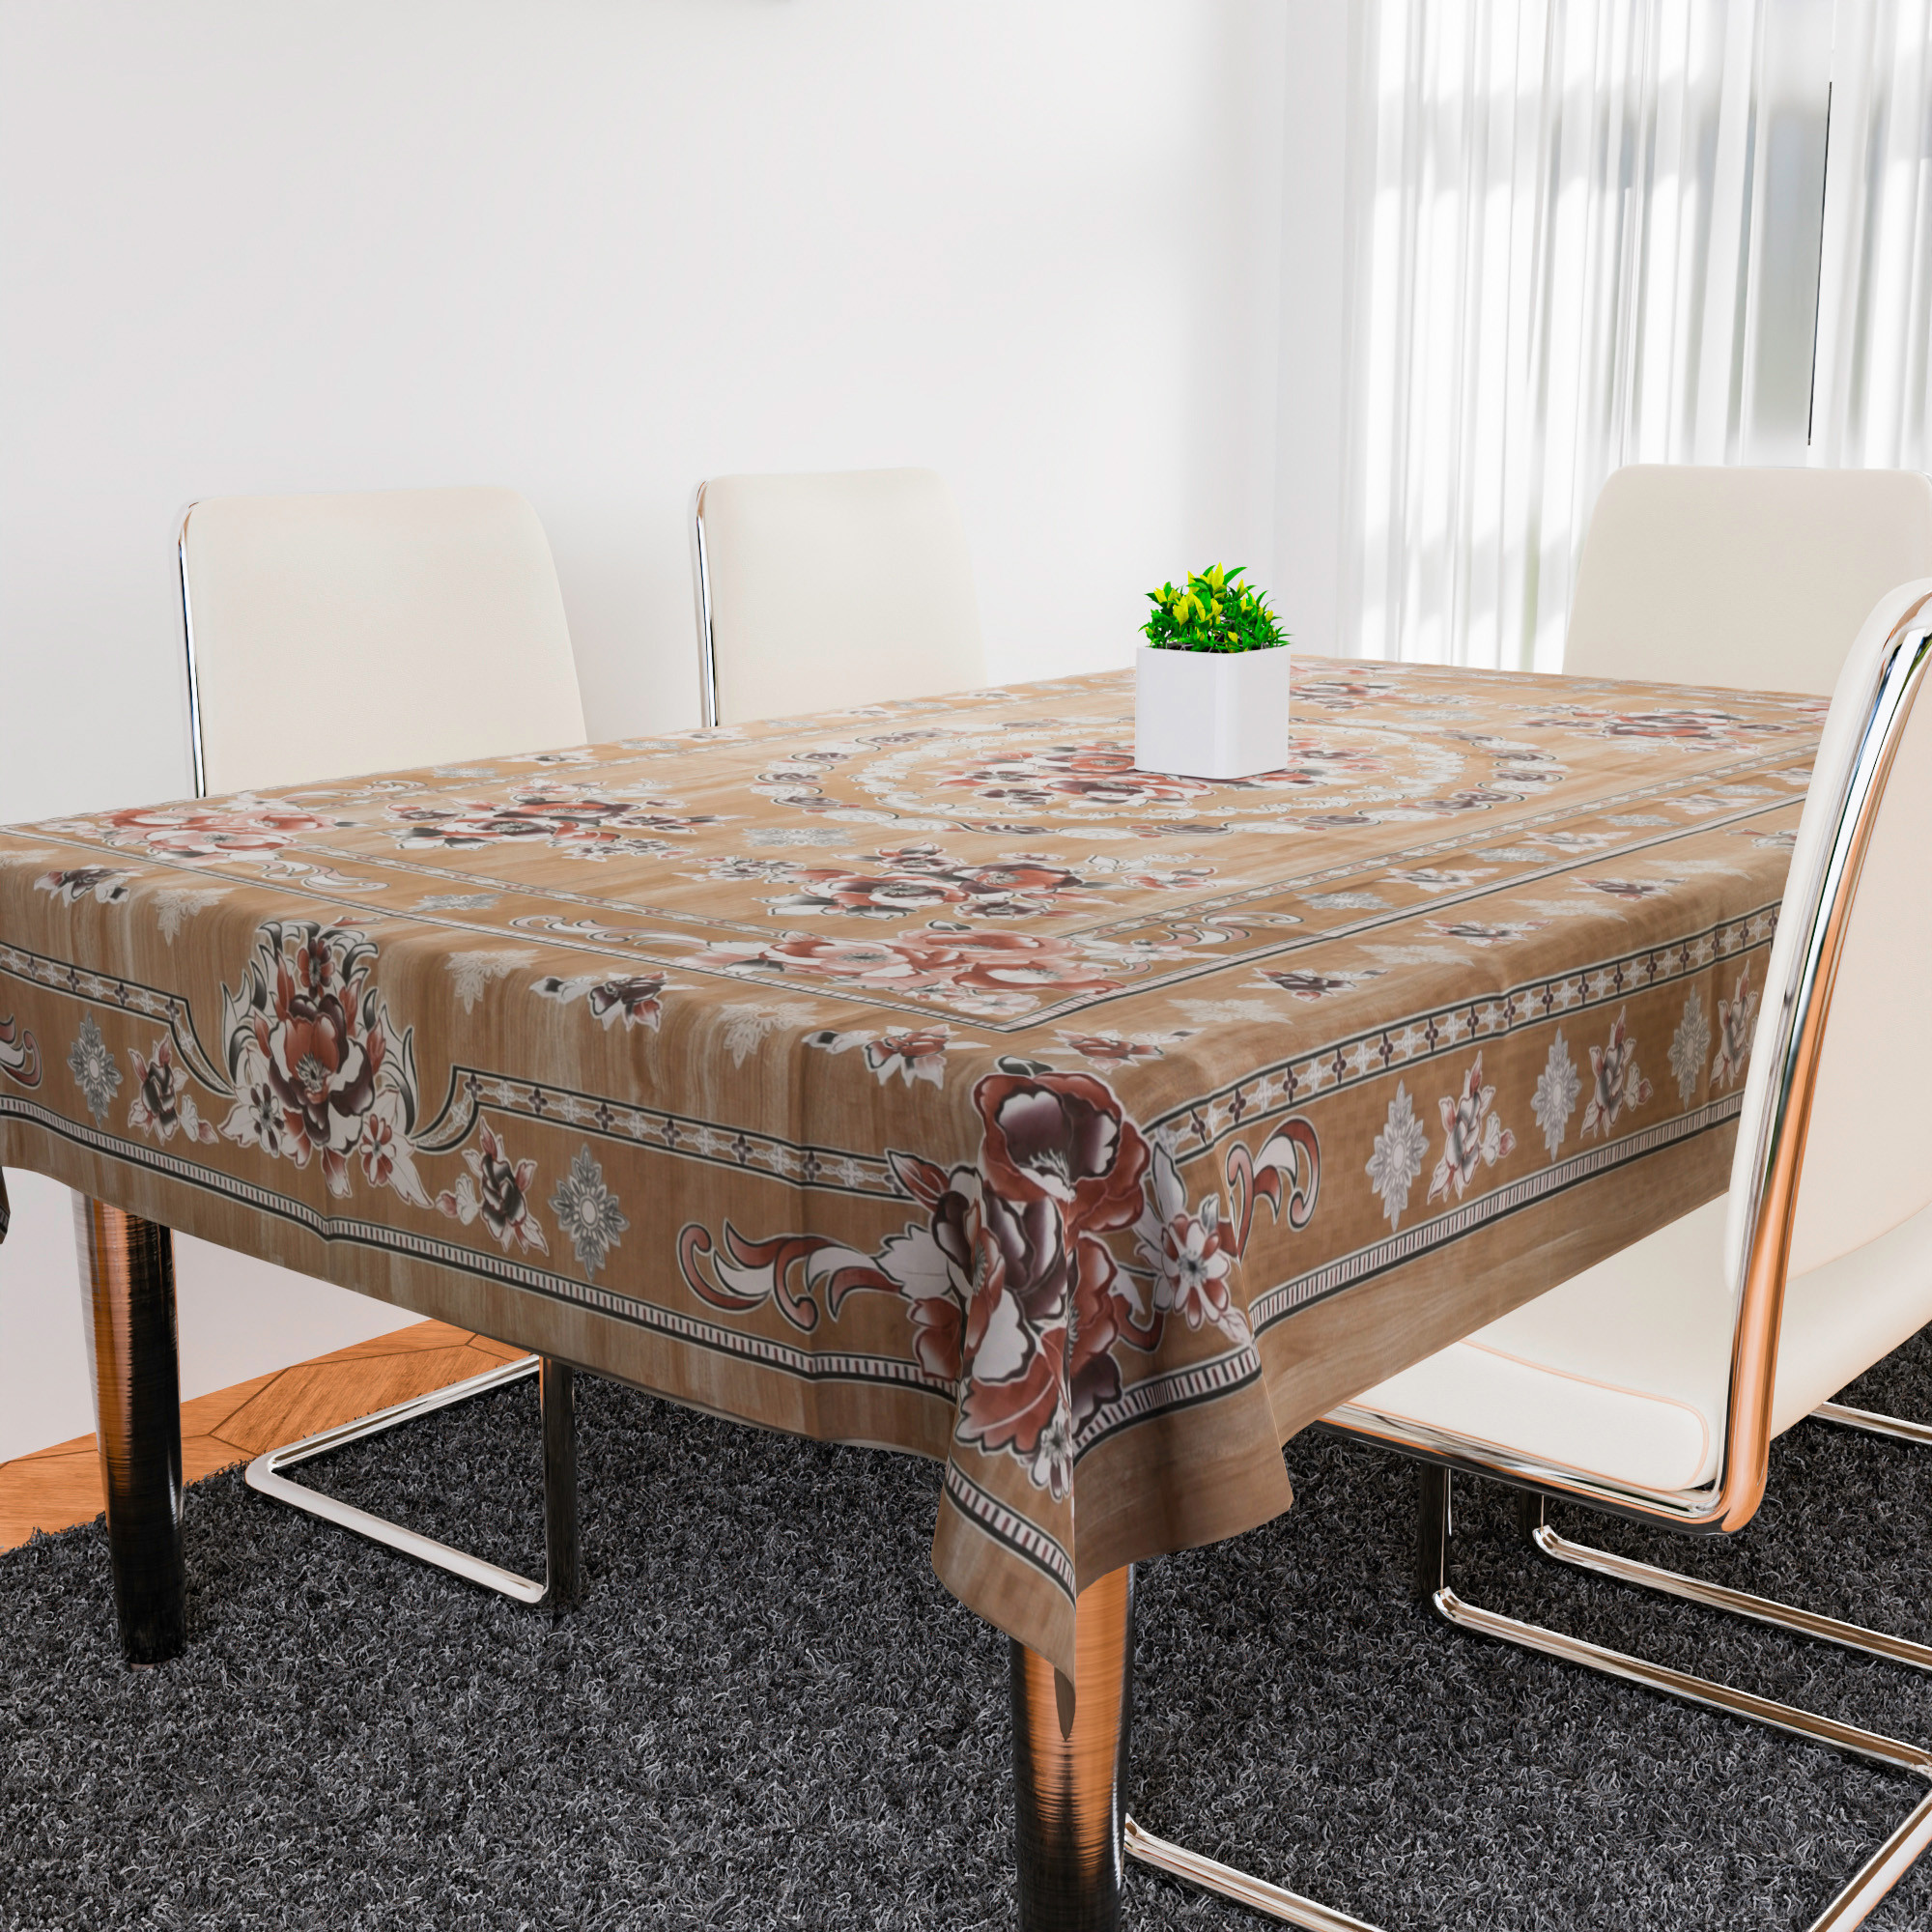 Kuber Industries Dining Table Cover | PVC Table Cloth Cover | 6 Seater Table Cloth | Table Protector | Table Cover for Dining Table | Passion Flower | 60x90 Inch | DTC | Brown